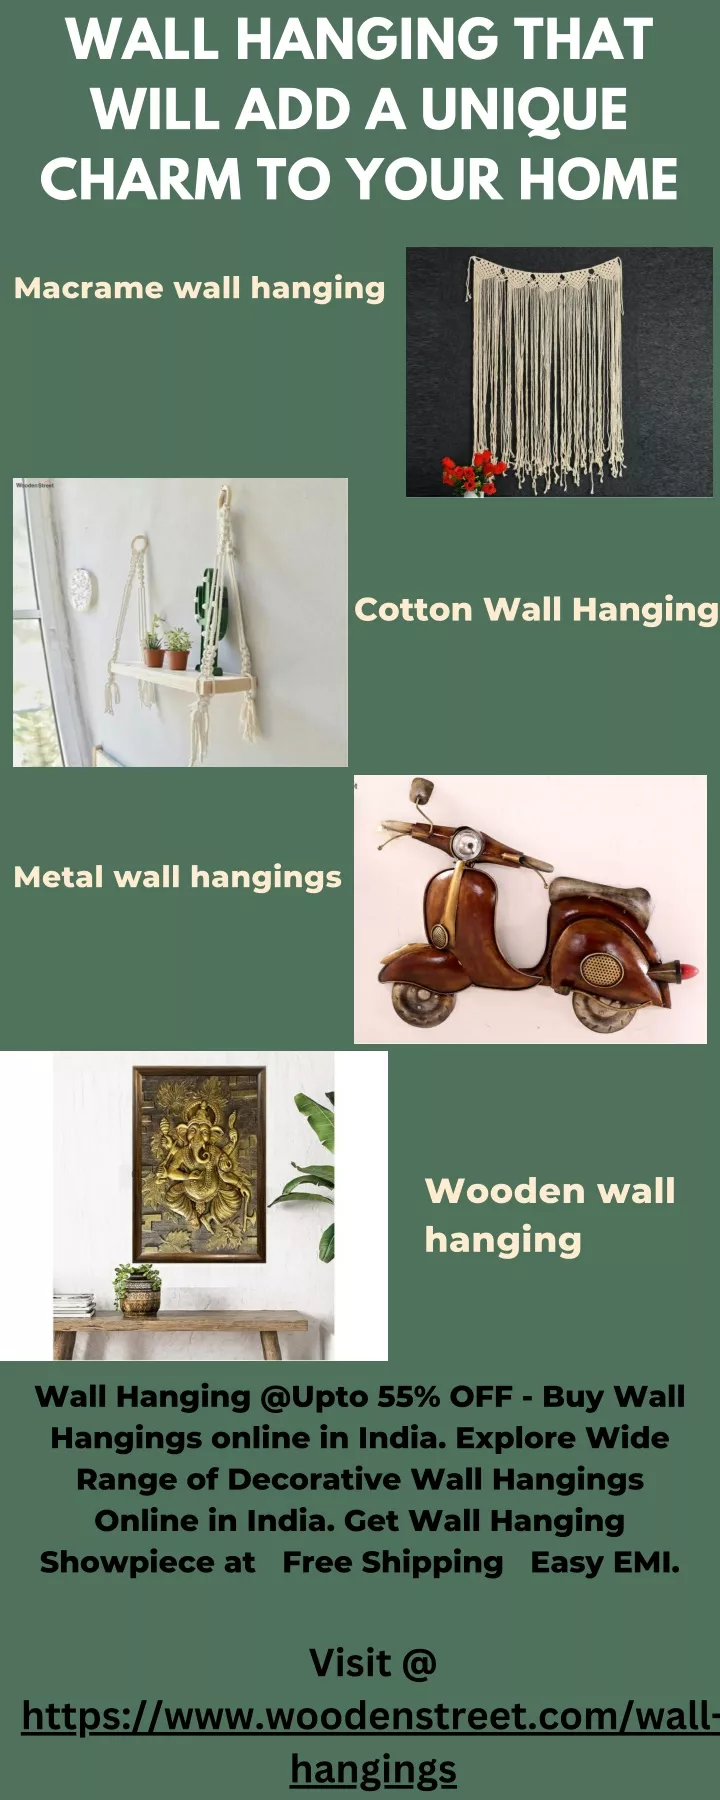 wall hanging that will add a unique charm to your